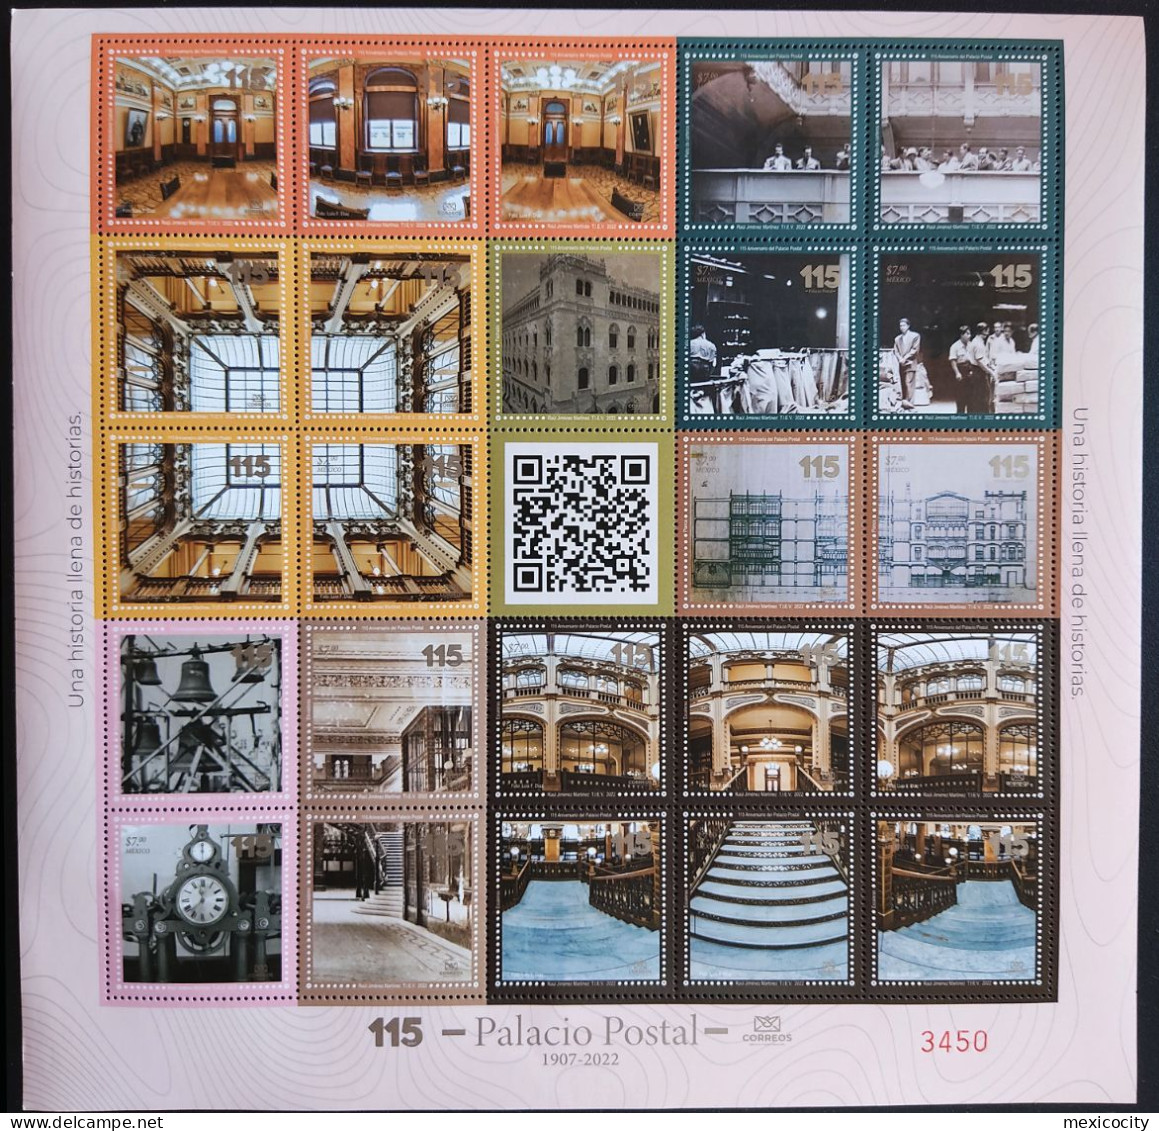 MEXICO 2022 POSTAL PALACE BLDG 115th Anniv Limited Edition 24 Diff. Postal Stamp Sheet In Special Folder + FDC, Rare! - Mexiko